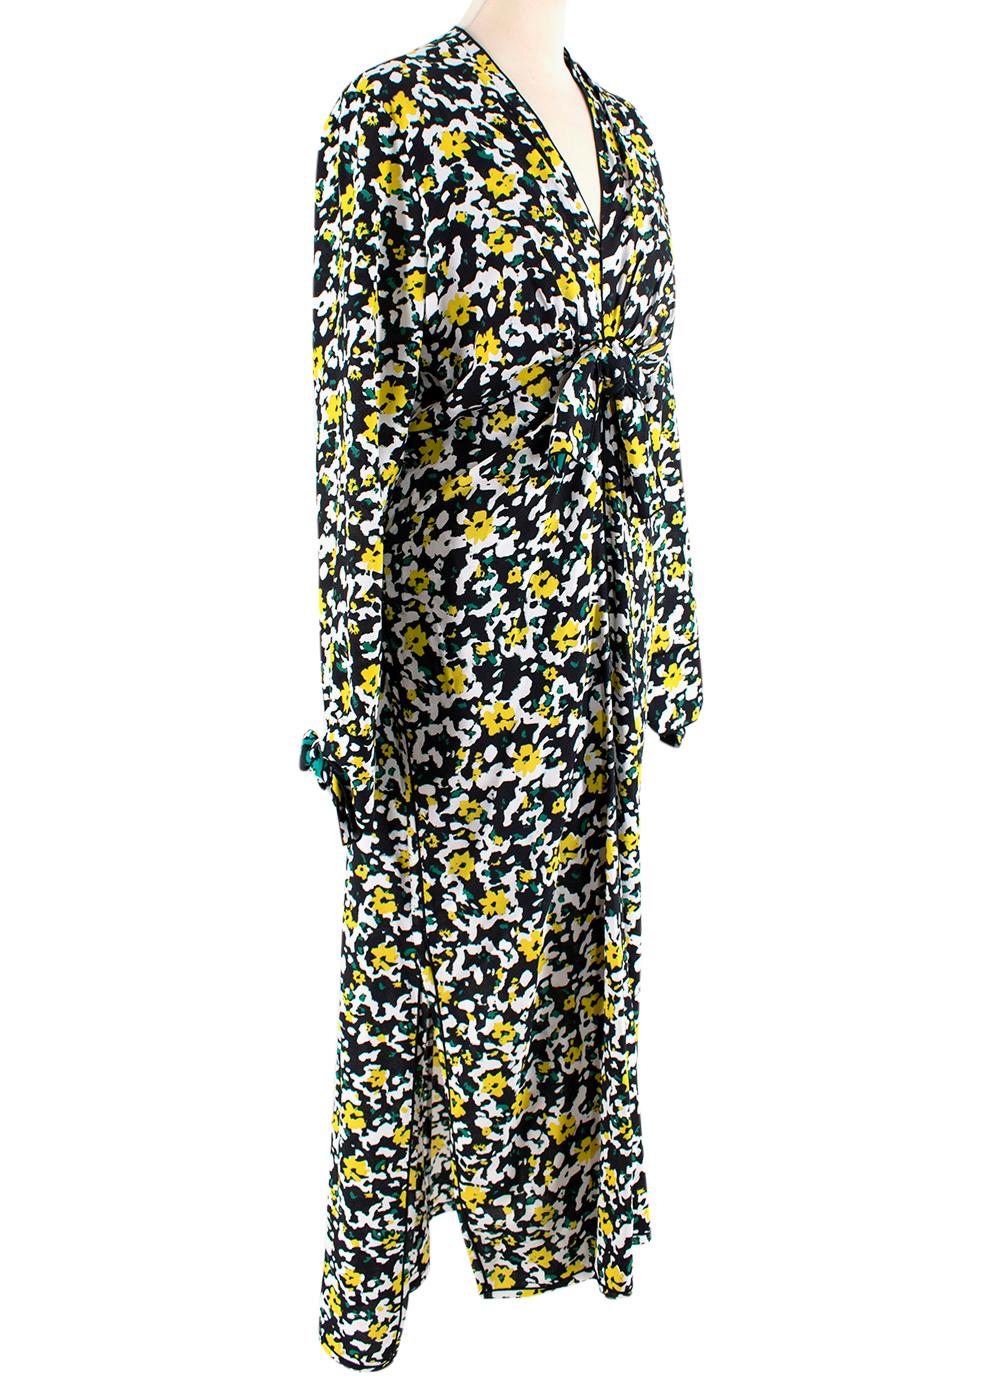 Proenza Schouler Knotted Floral-print Crepe Midi Dress

- Deep V neckline 
- Invisible zipper at back 
- Bow on waist and cuff
- Loose fit 

No made in or care label

PLEASE NOTE, THESE ITEMS ARE PRE-OWNED AND MAY SHOW SIGNS OF BEING STORED EVEN